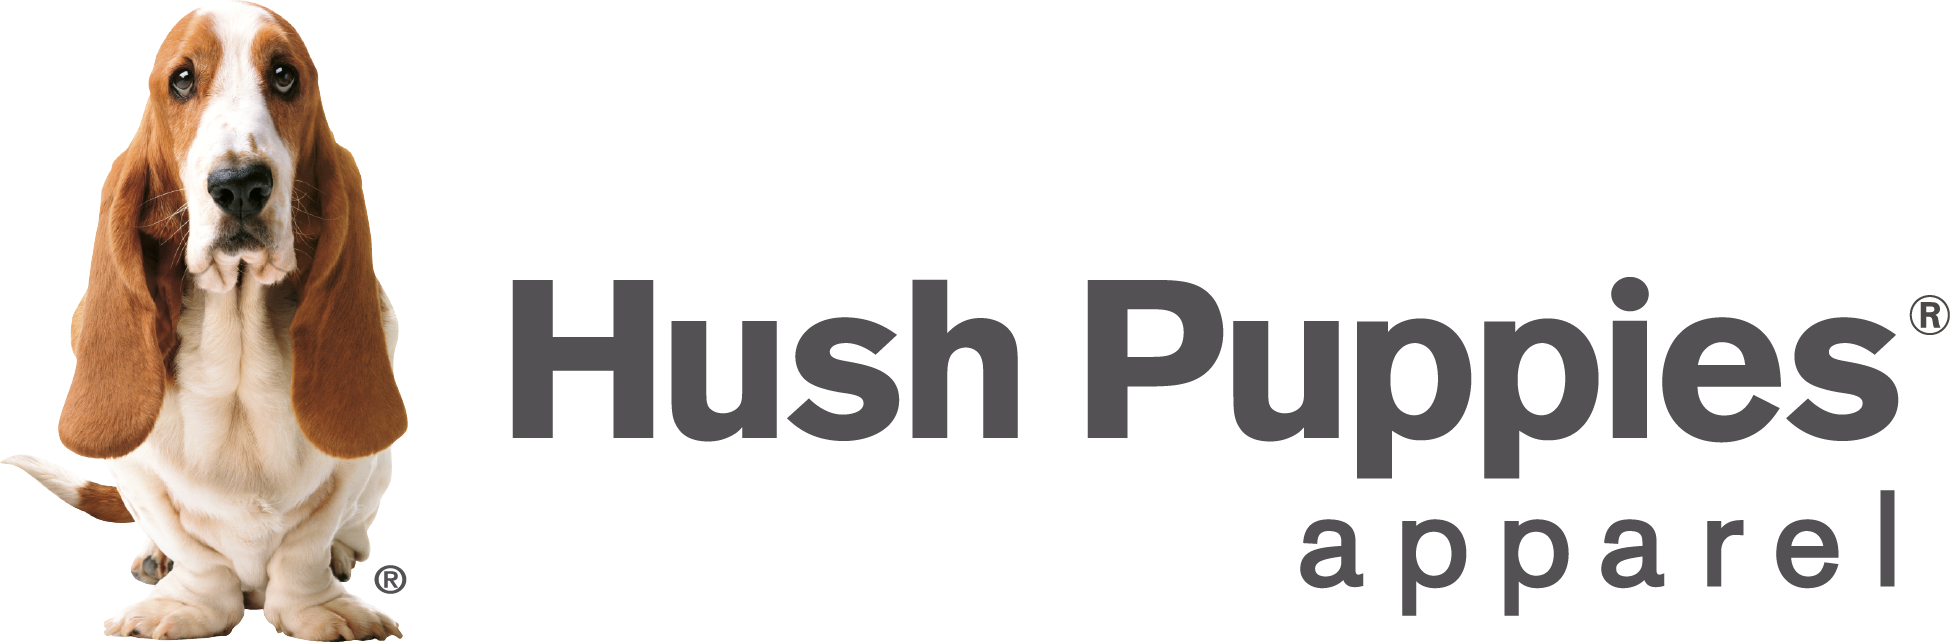 HUSH PUPPIES APPAREL (Official Singapore Store)